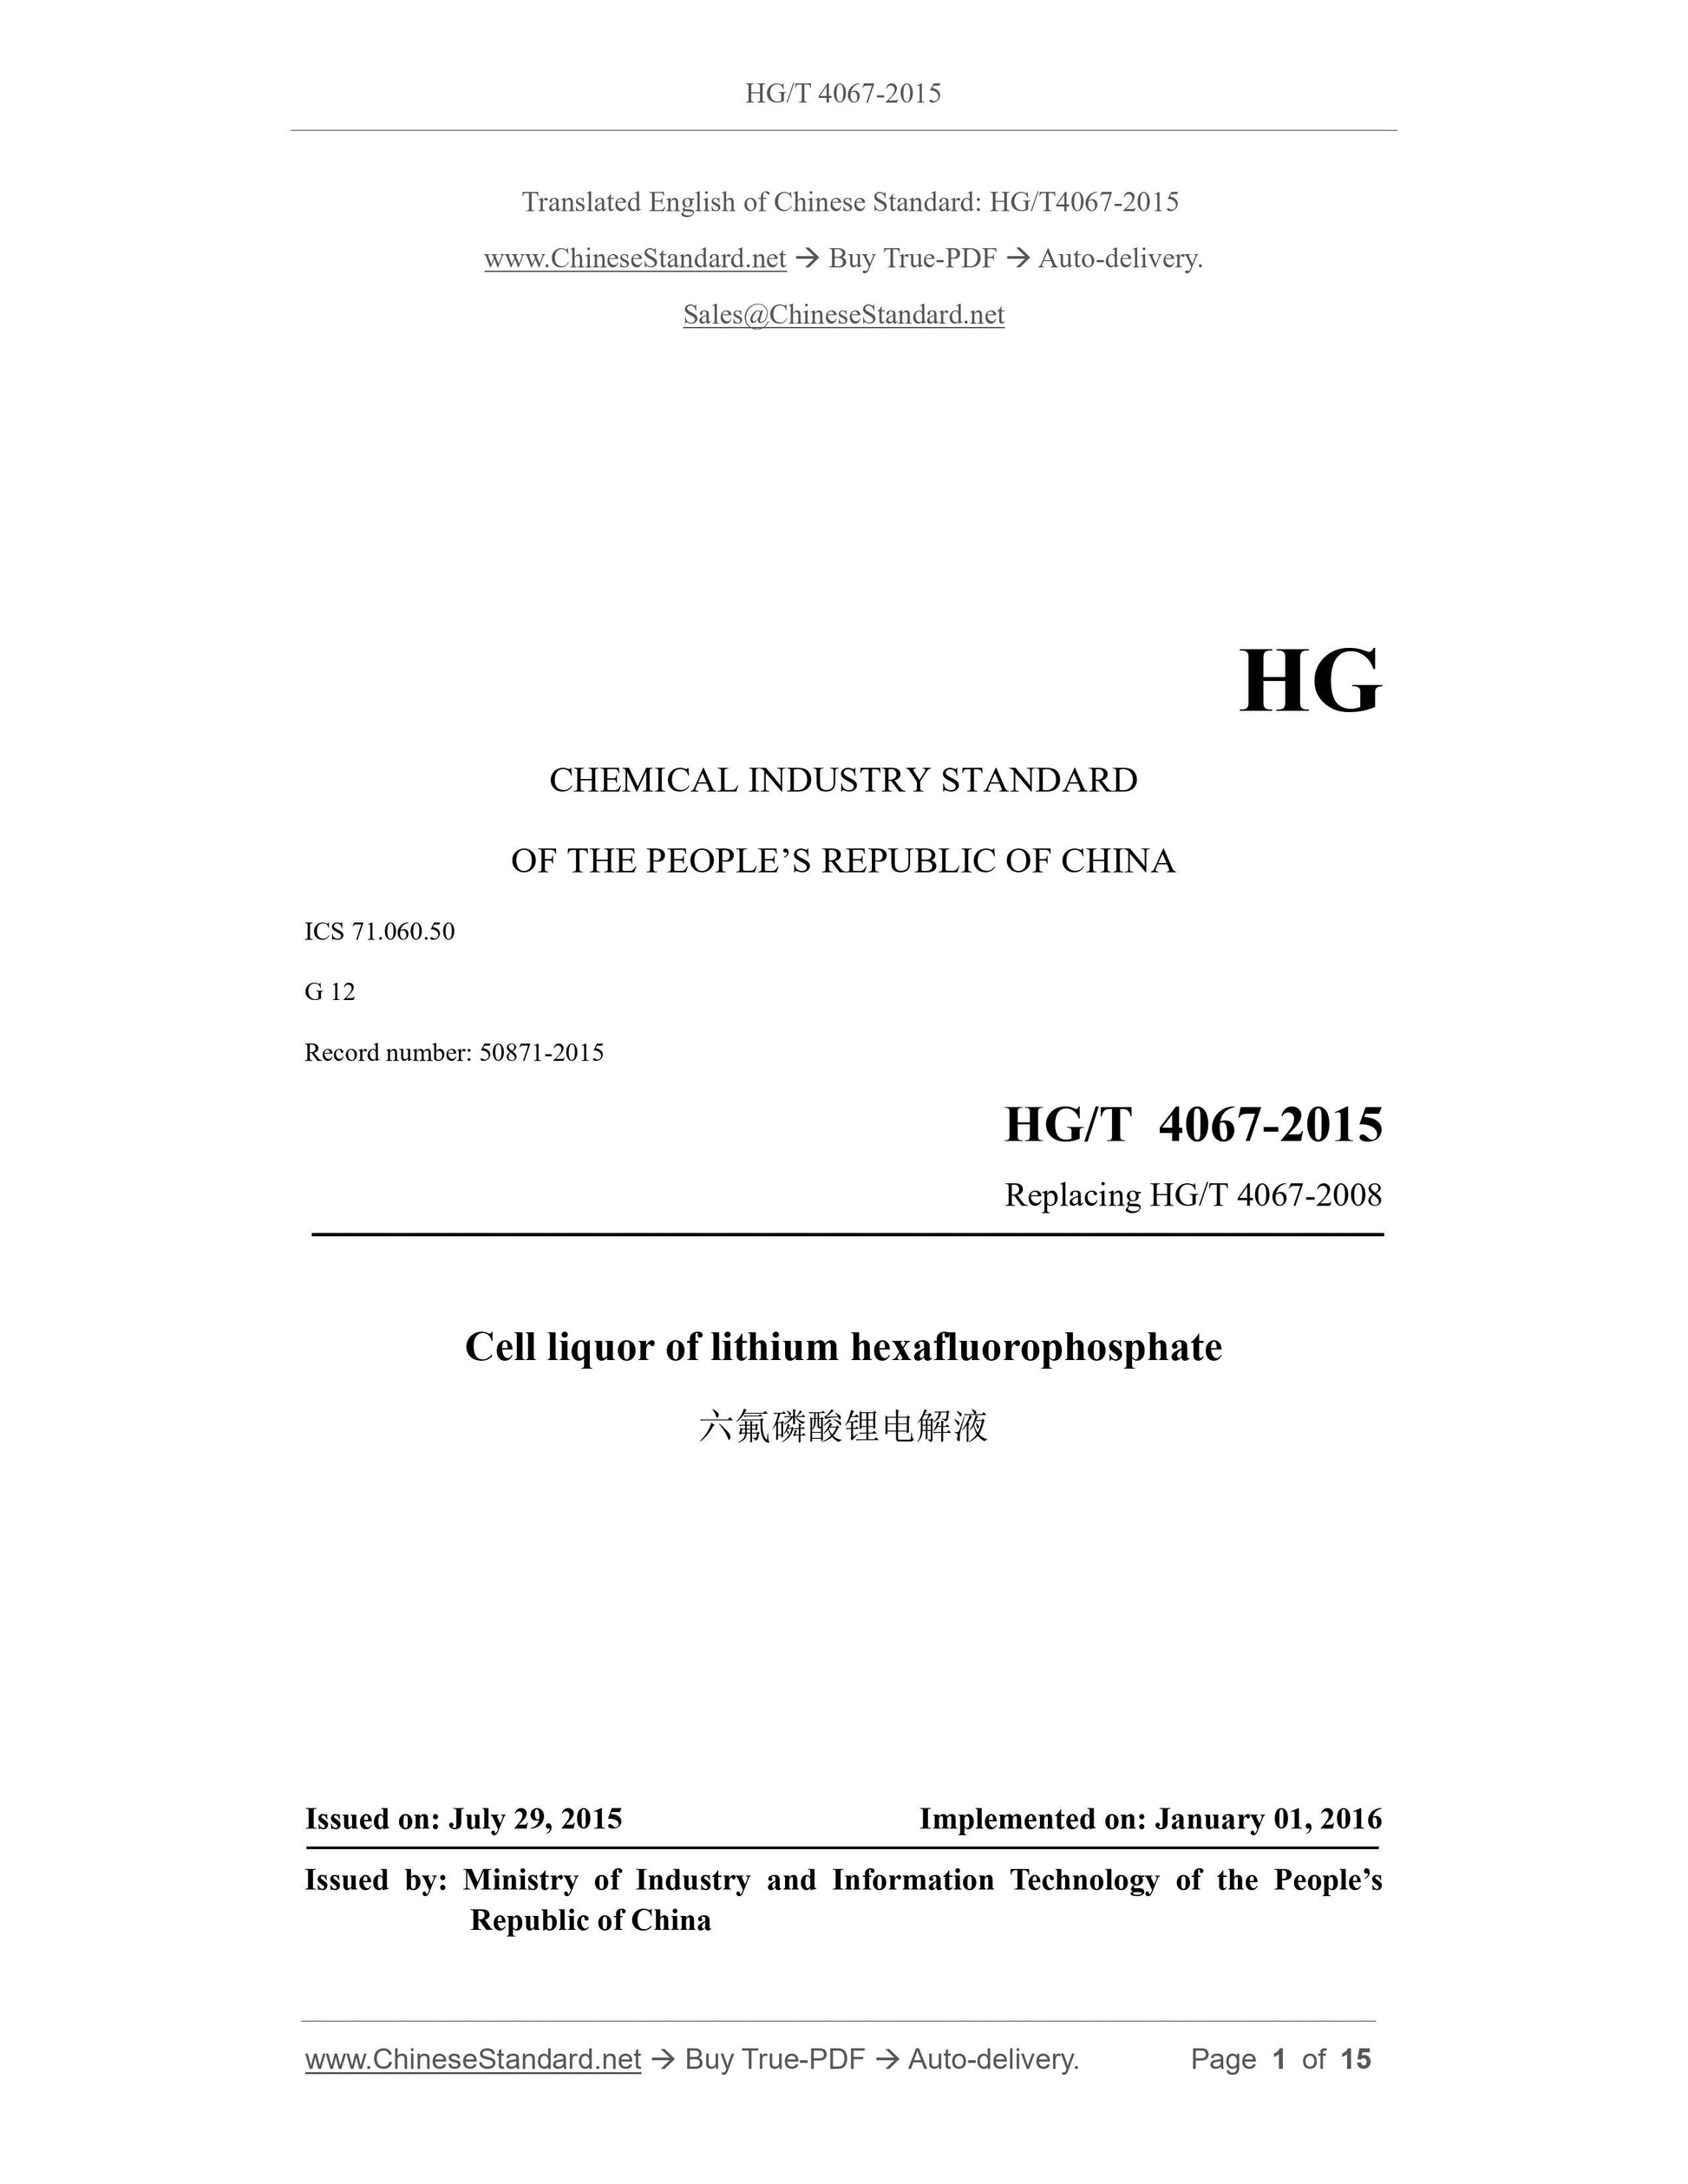 HG/T 4067-2015 Page 1